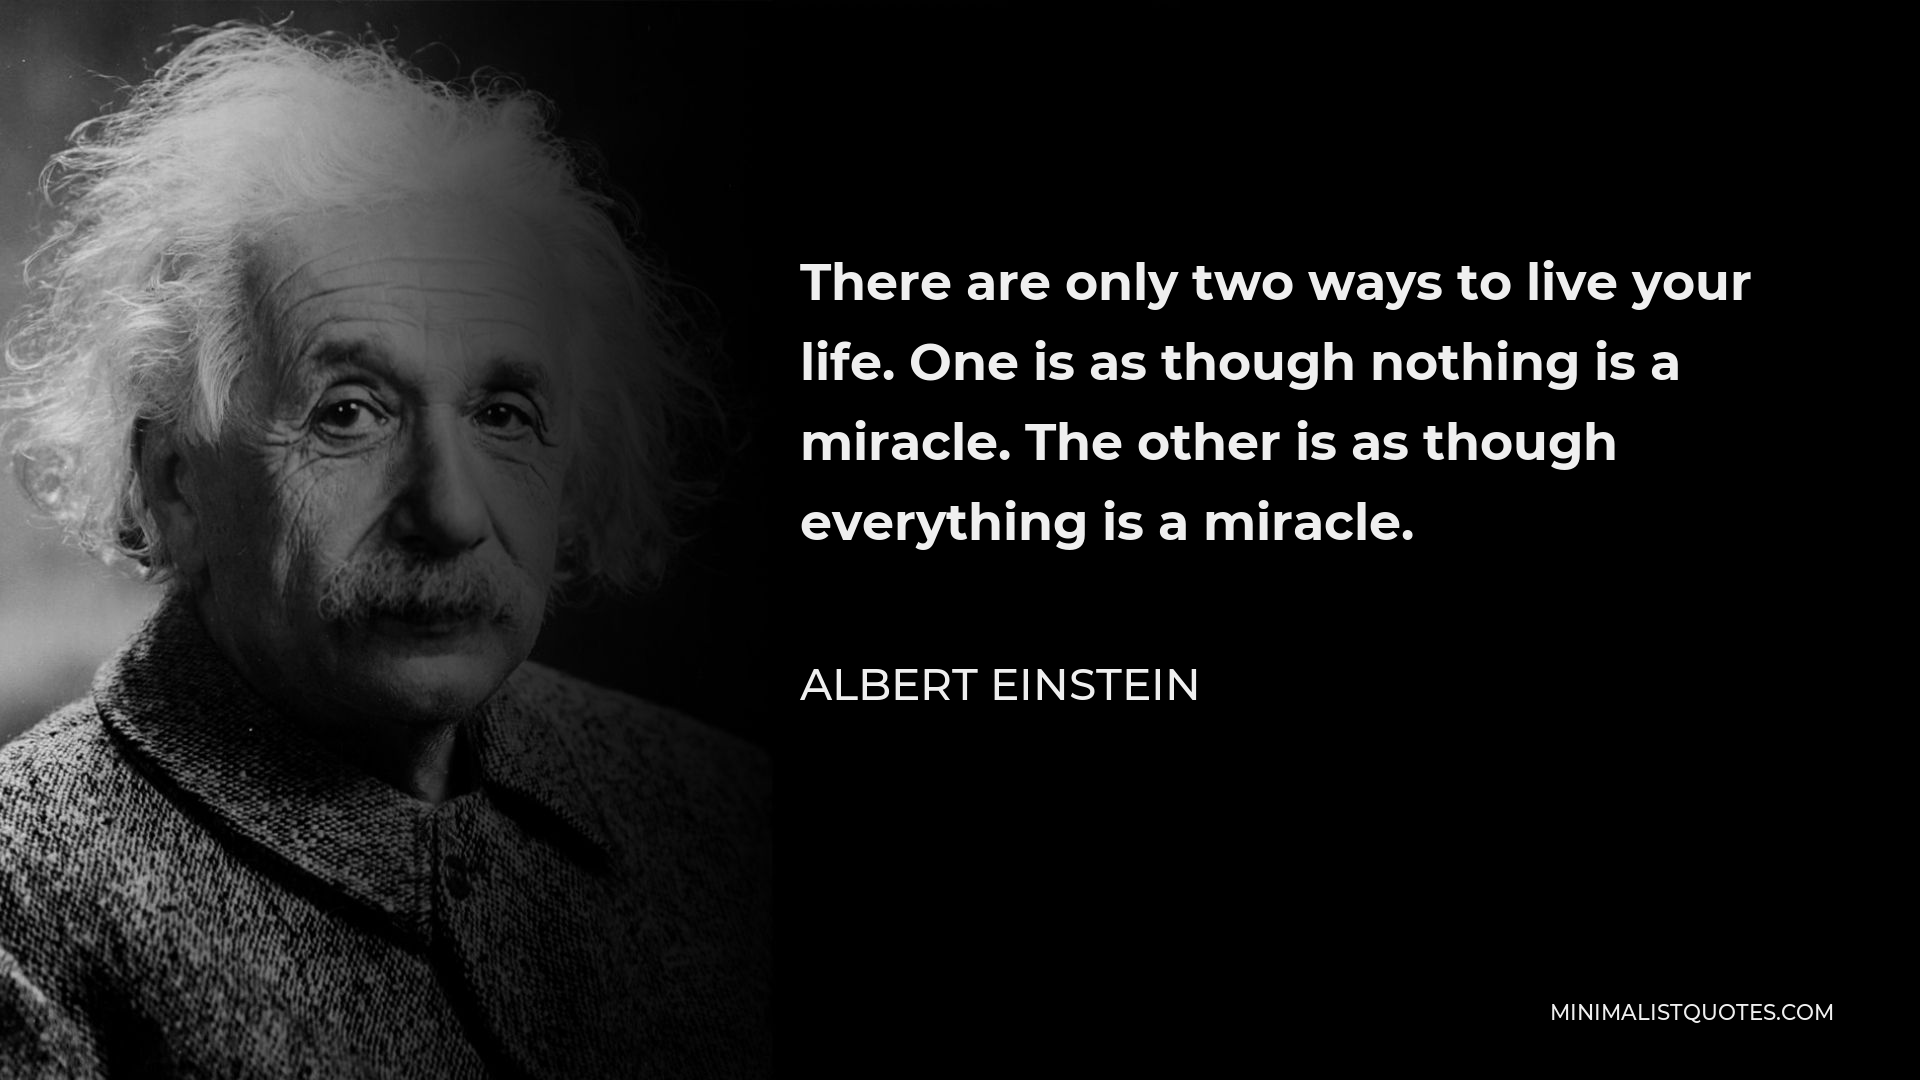 Albert Einstein Quote - There are only two ways to live your life. One is as though nothing is a miracle. The other is as though everything is a miracle.